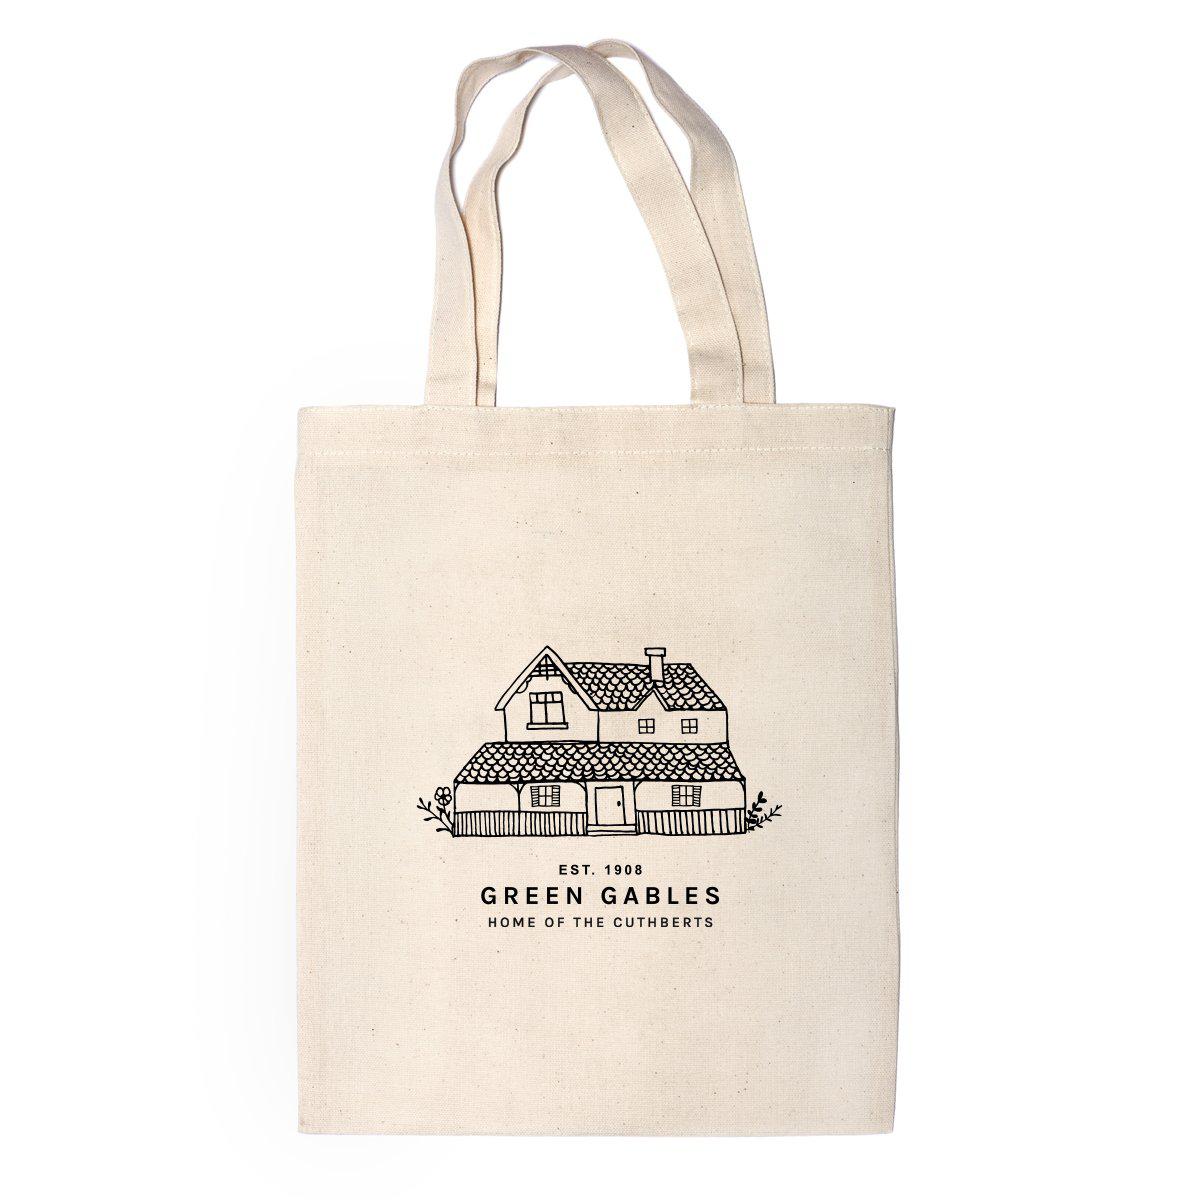 "Home of the Cuthberts" Tote Bag